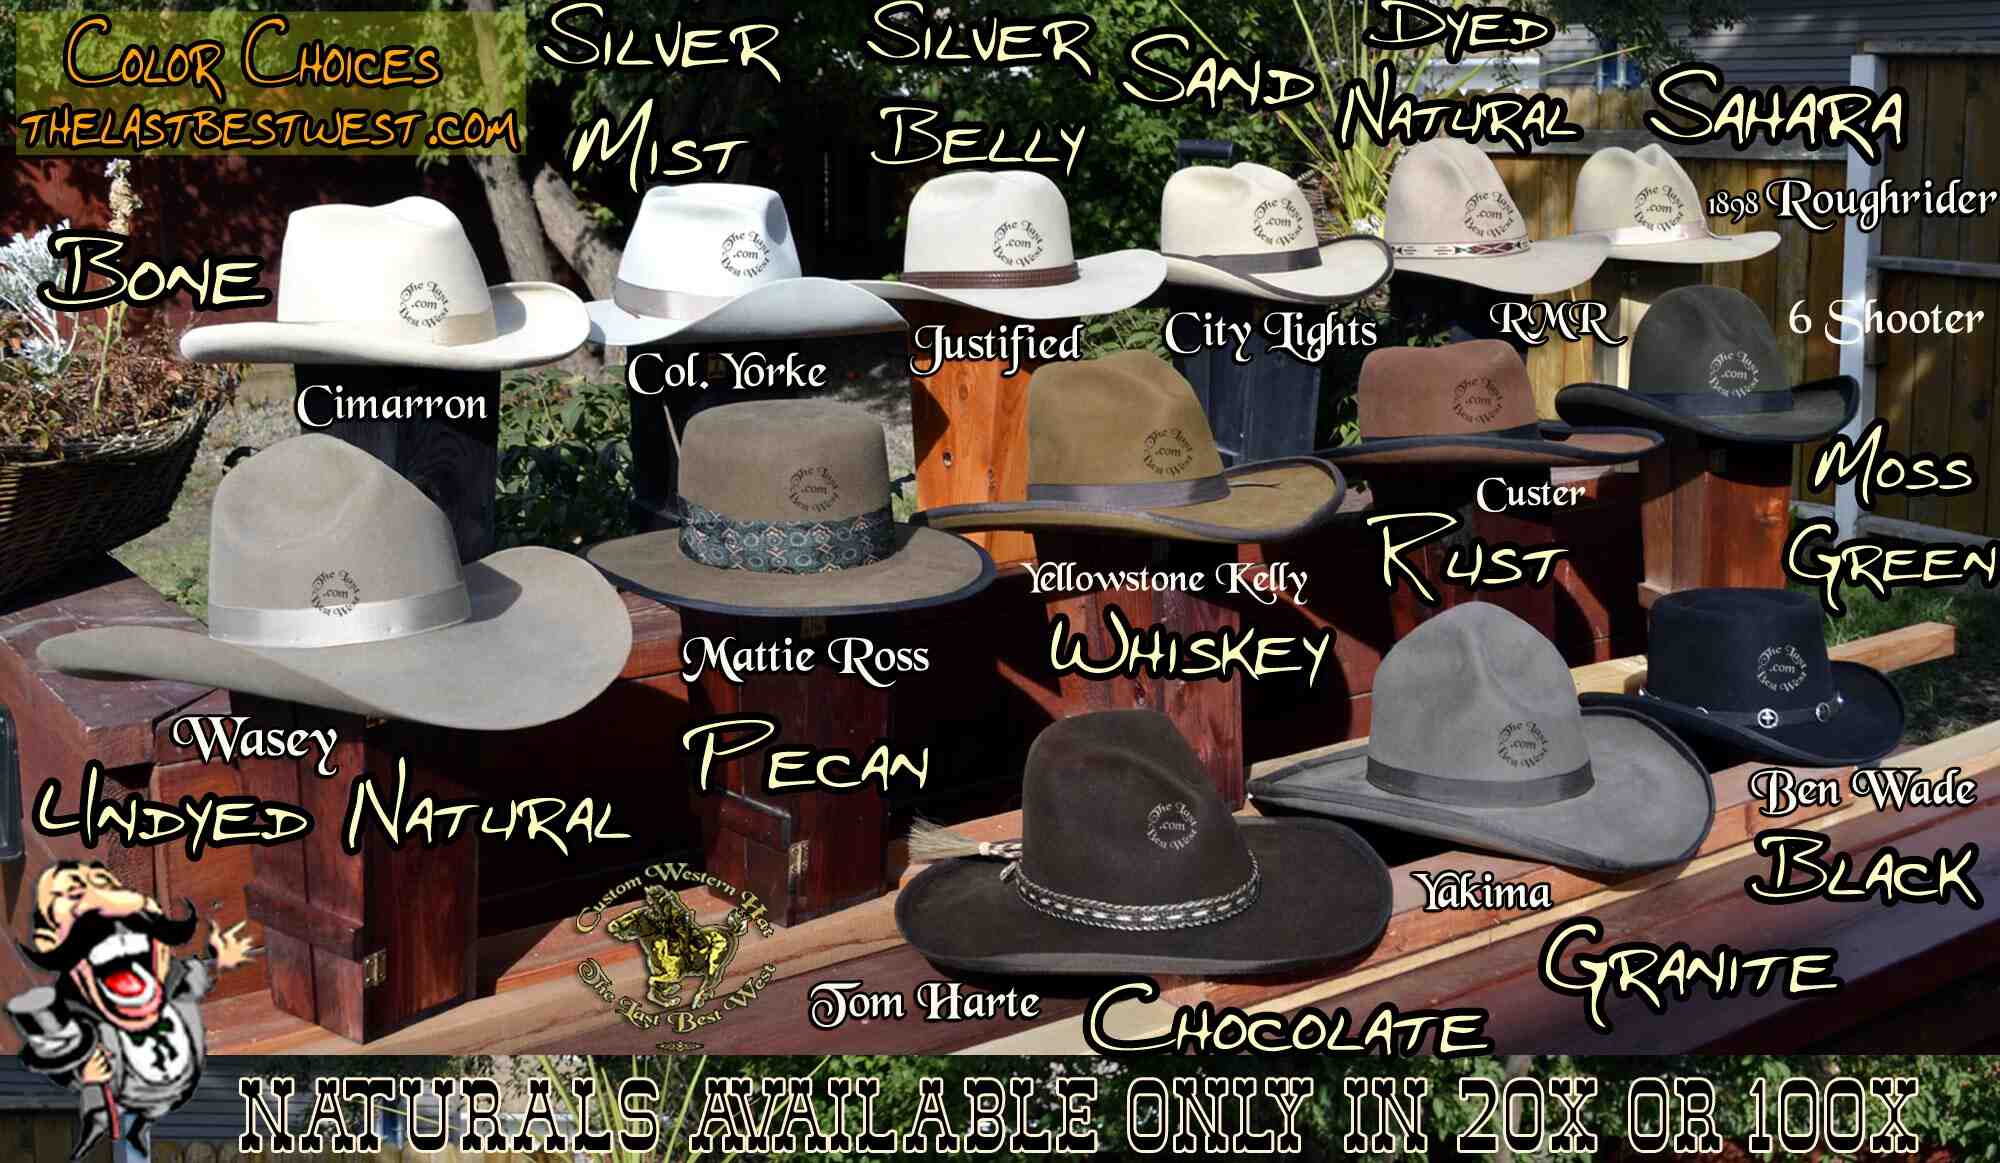 What does wearing a cowboy hat mean?